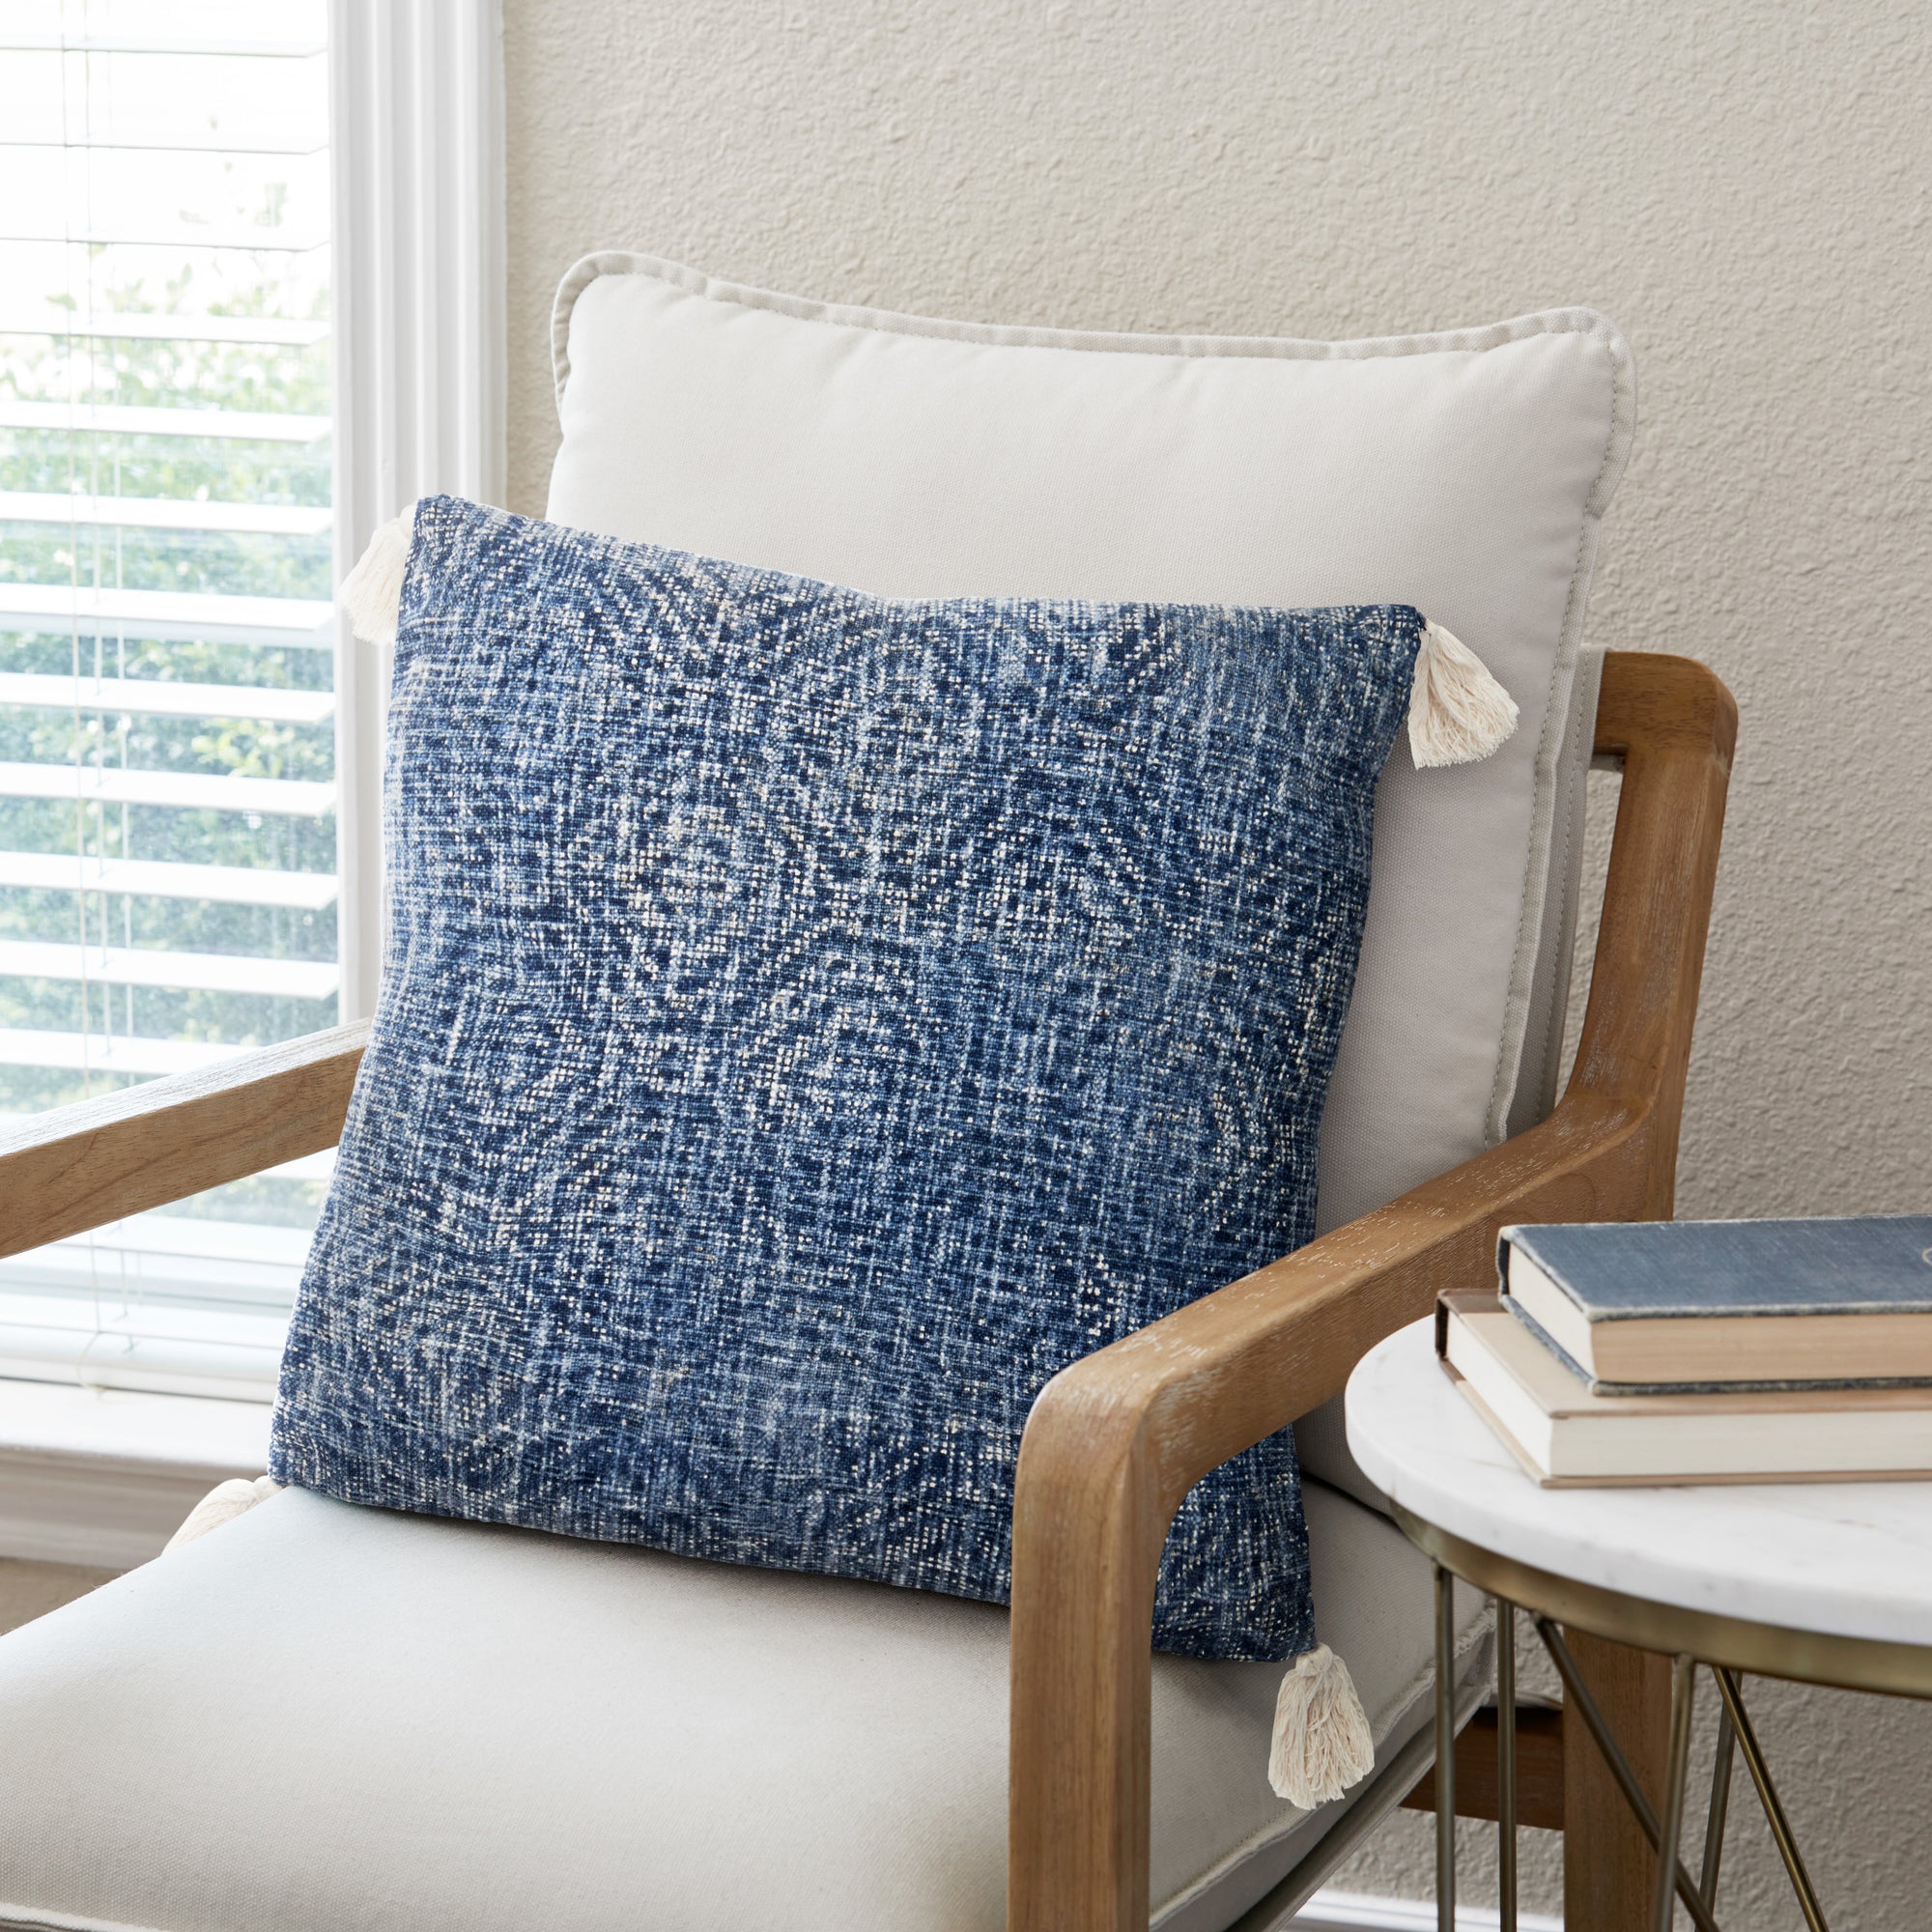 Rugs by Roo |  Loloi Justina Blakeney Blue Cotton Pillow Default